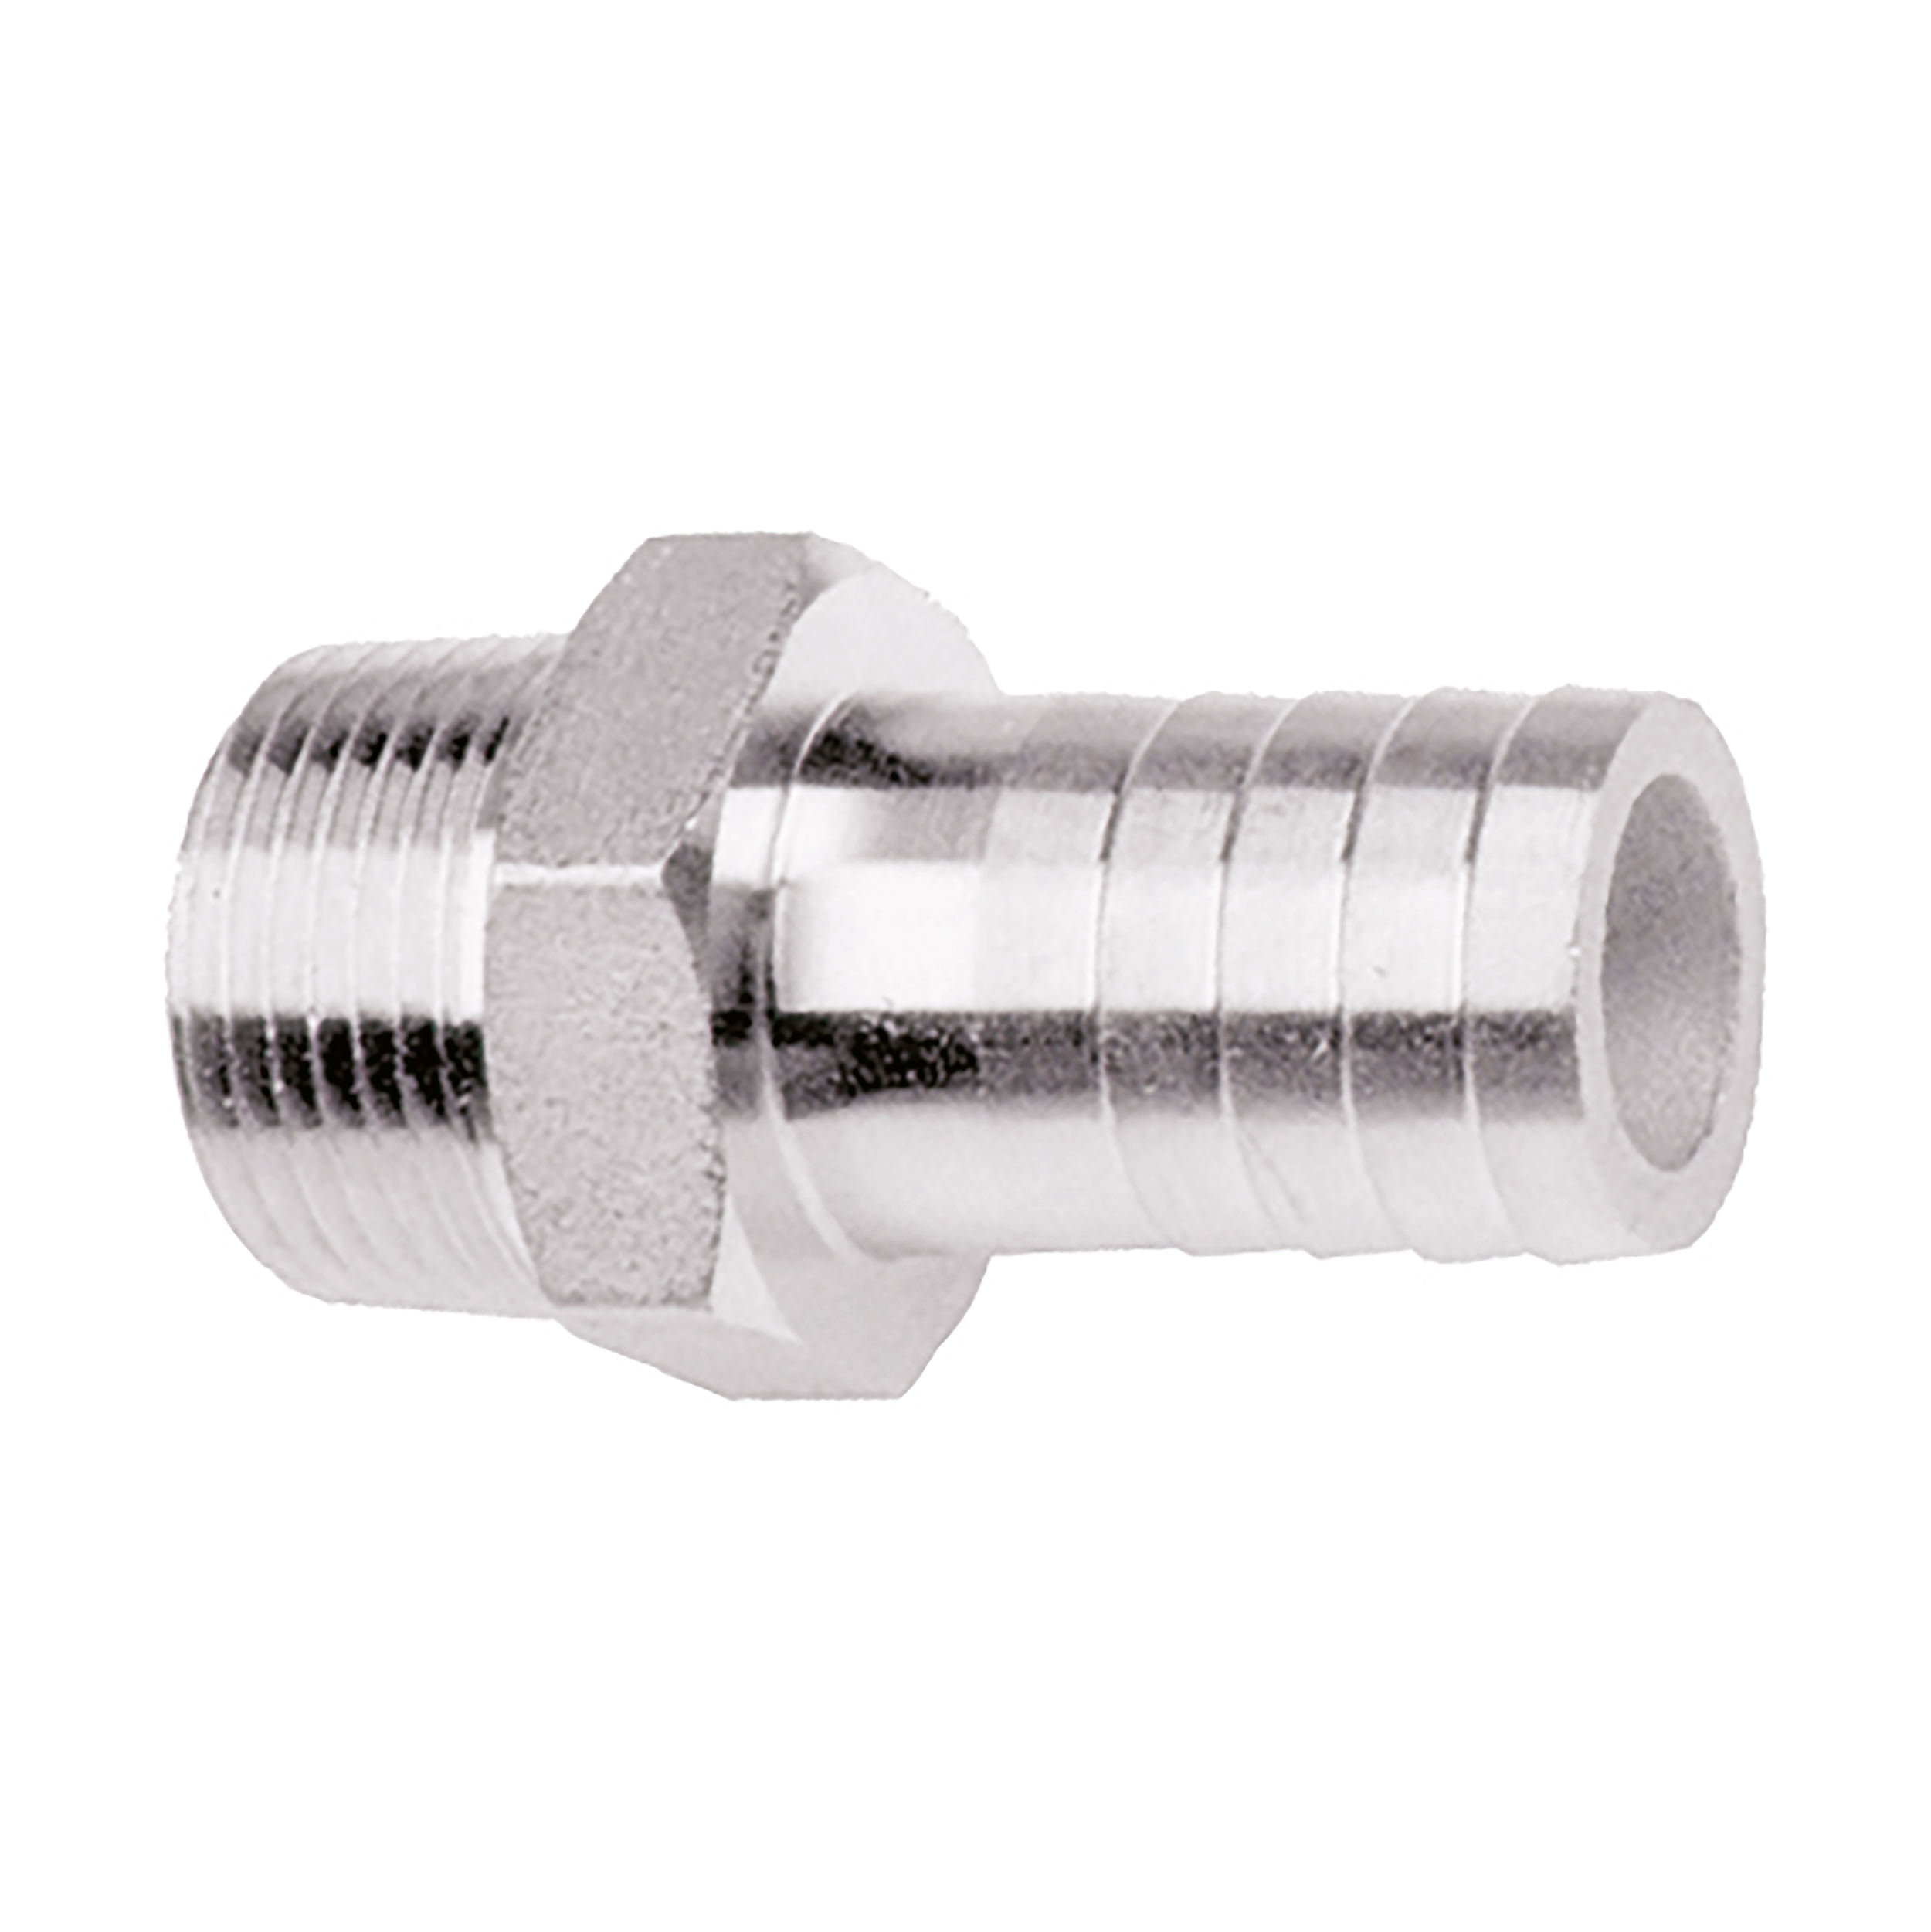 Threaded hose connector stainless steel V4A, thread: R⅛ male (conical male thread acc. to ISO 7/1), Ø7 mm, length: 36 mm